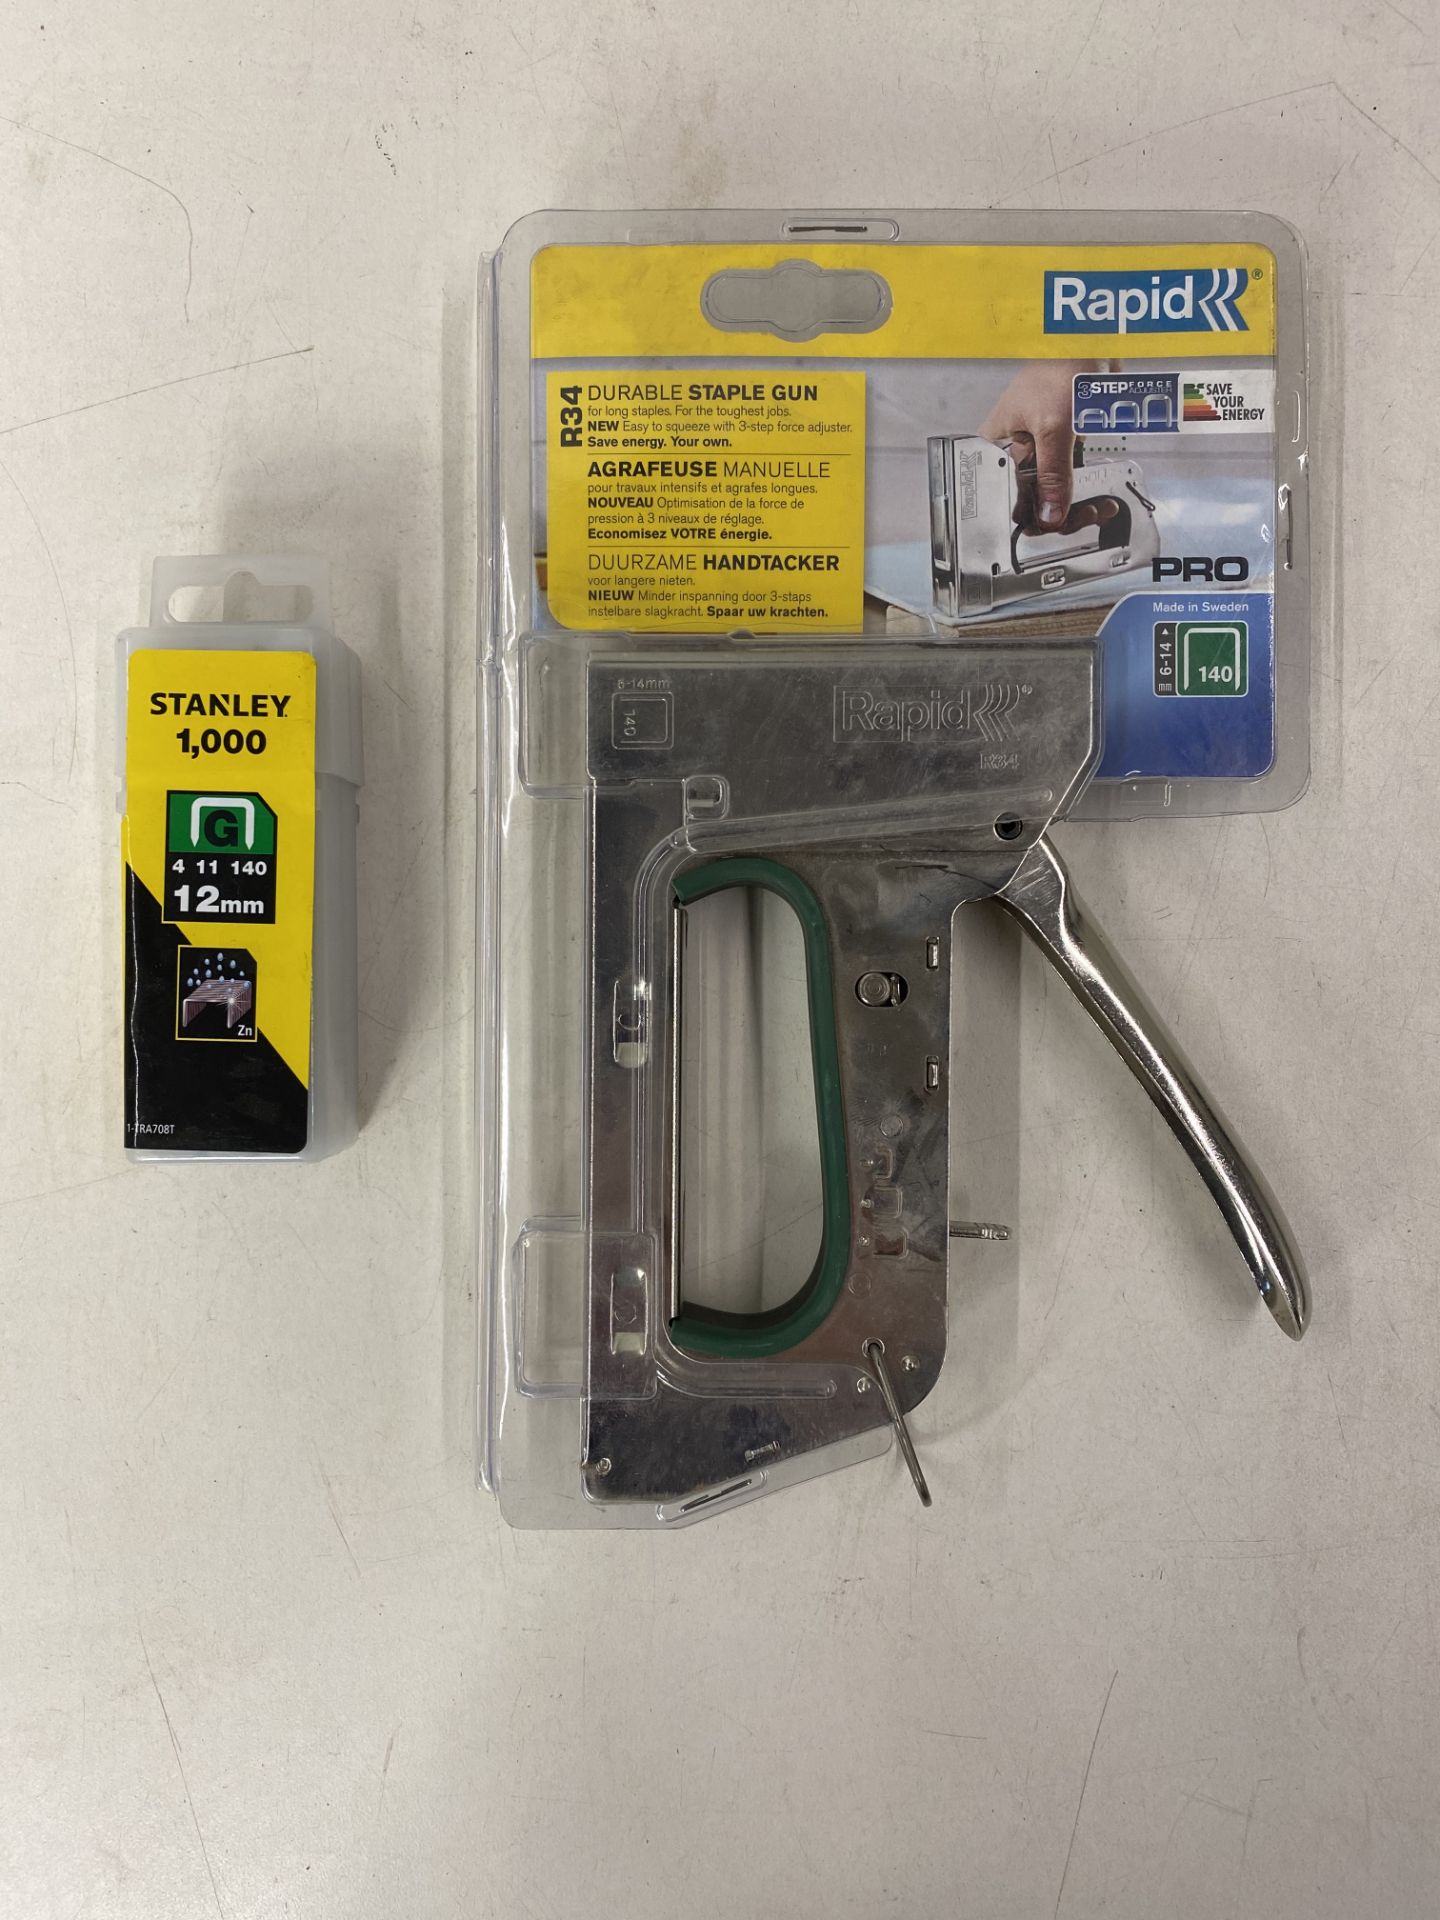 Mixed Lot Of RAPID Durable Staple Guns And Staples